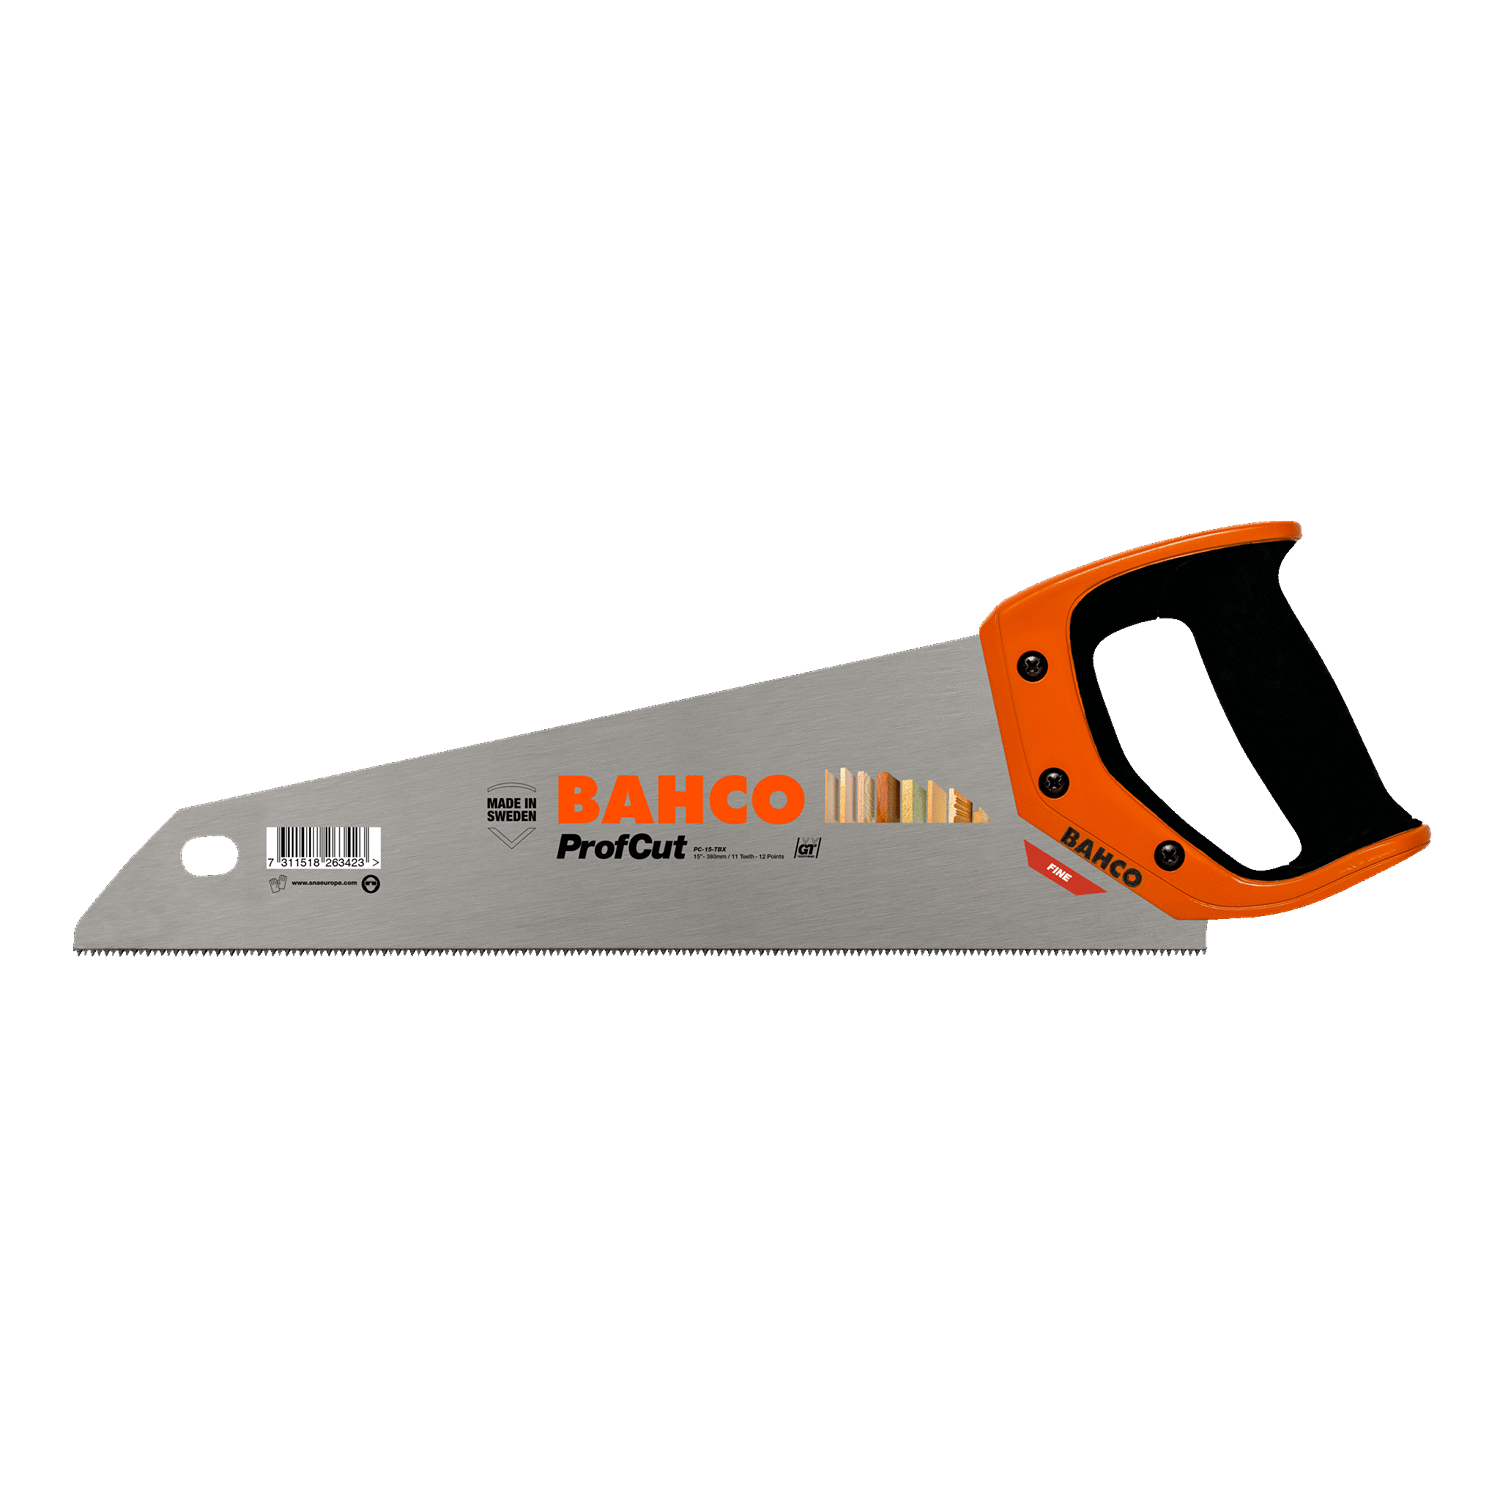 BAHCO PC-TBX ProfCut Toolbox Handsaw for Thick Materials - Premium Handsaw from BAHCO - Shop now at Yew Aik.